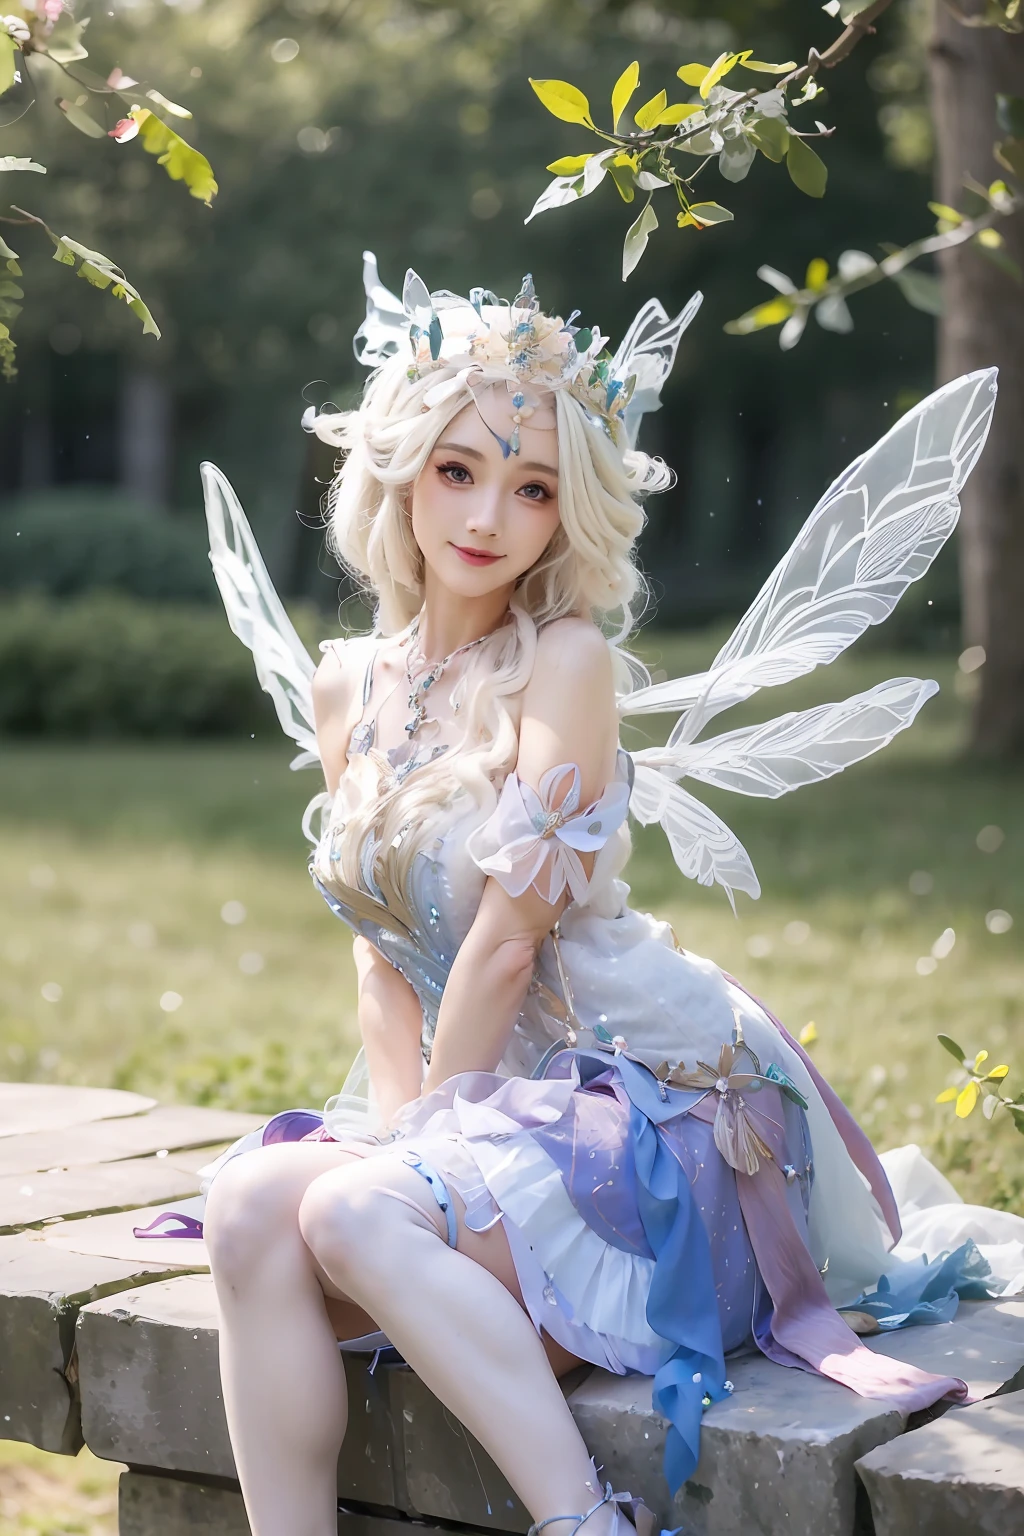 there is a woman sitting on a bench with a fairy costume, anime cosplay, anime girl cosplay, smiling as a queen of fairies, portrait of a fairy, beautiful fairy, forest fairy, fairycore, faerie, beautiful fairie, beautiful adult fairy, ornate cosplay, portrait of fairy, astral fairy, queen of the fairies, cosplay, cosplay photo